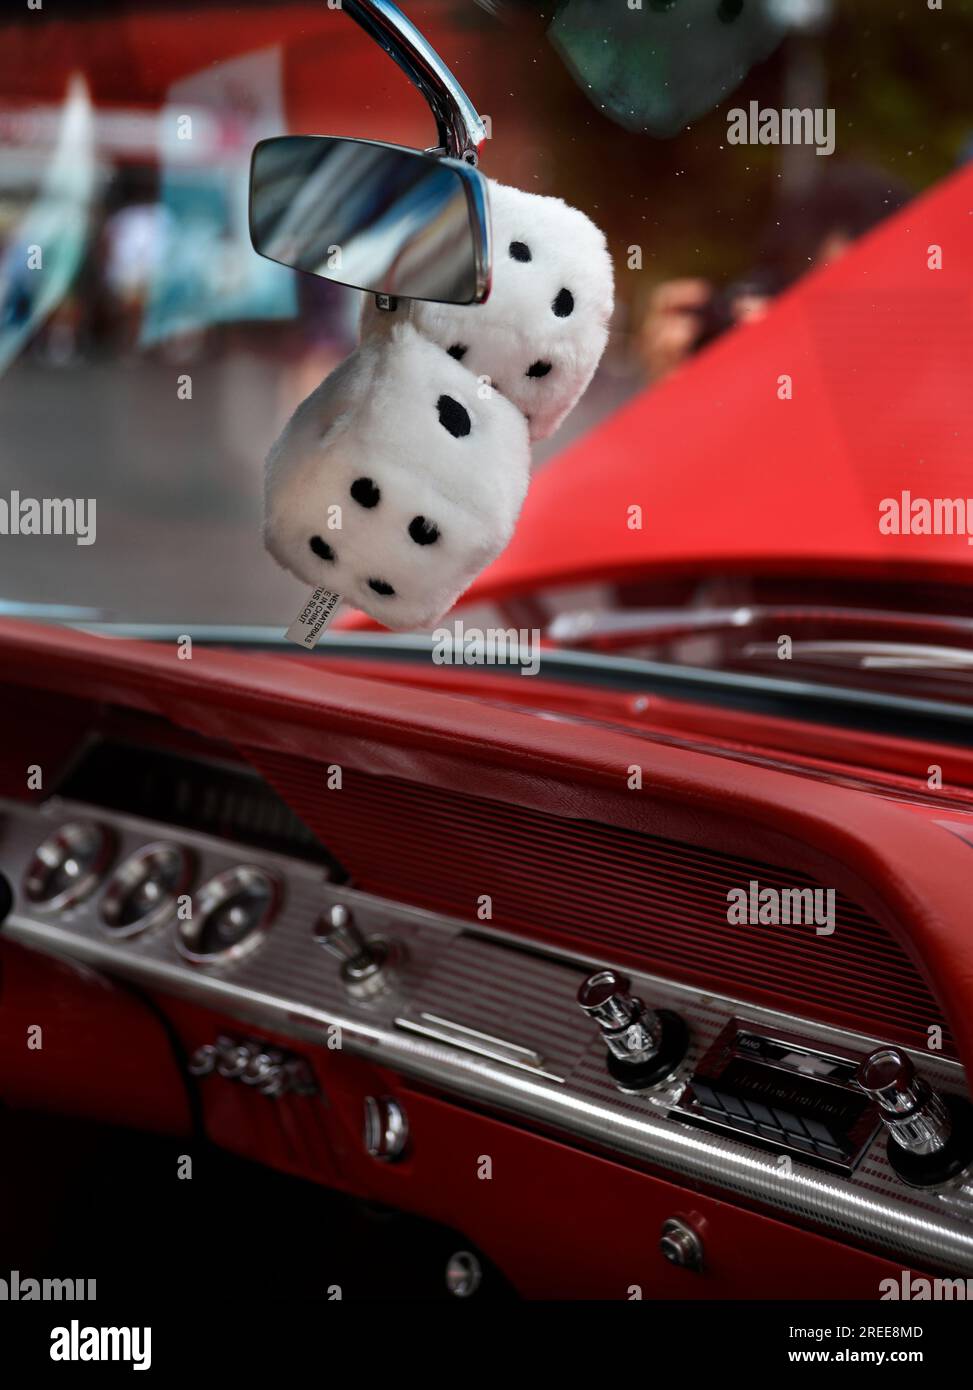 https://c8.alamy.com/comp/2REE8MD/a-1950s-chevrolet-convertible-with-fuzzy-dice-hanging-from-the-rearview-mirror-at-a-custom-car-show-in-abingdon-virginia-2REE8MD.jpg